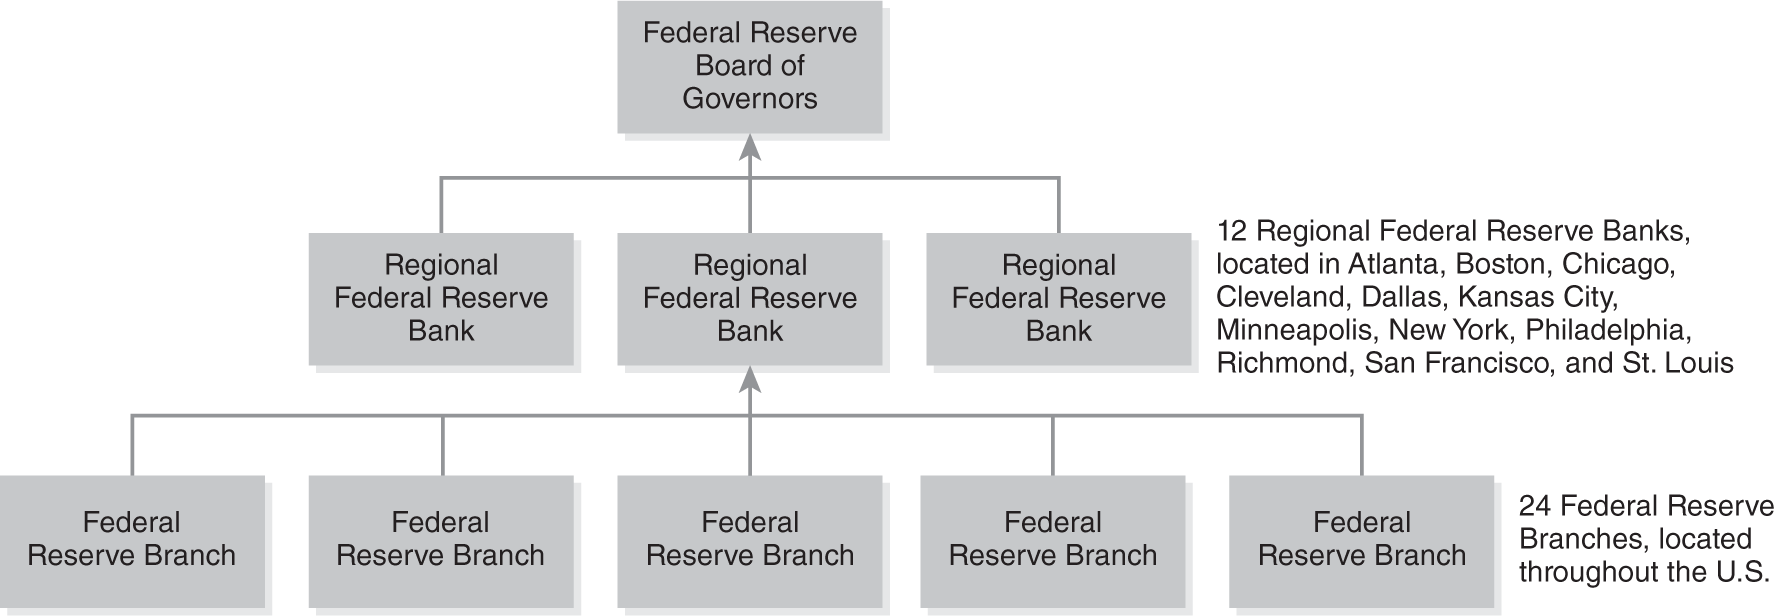 A flow diagram shows the hierarchy of the U.S. Federal Reserve system.